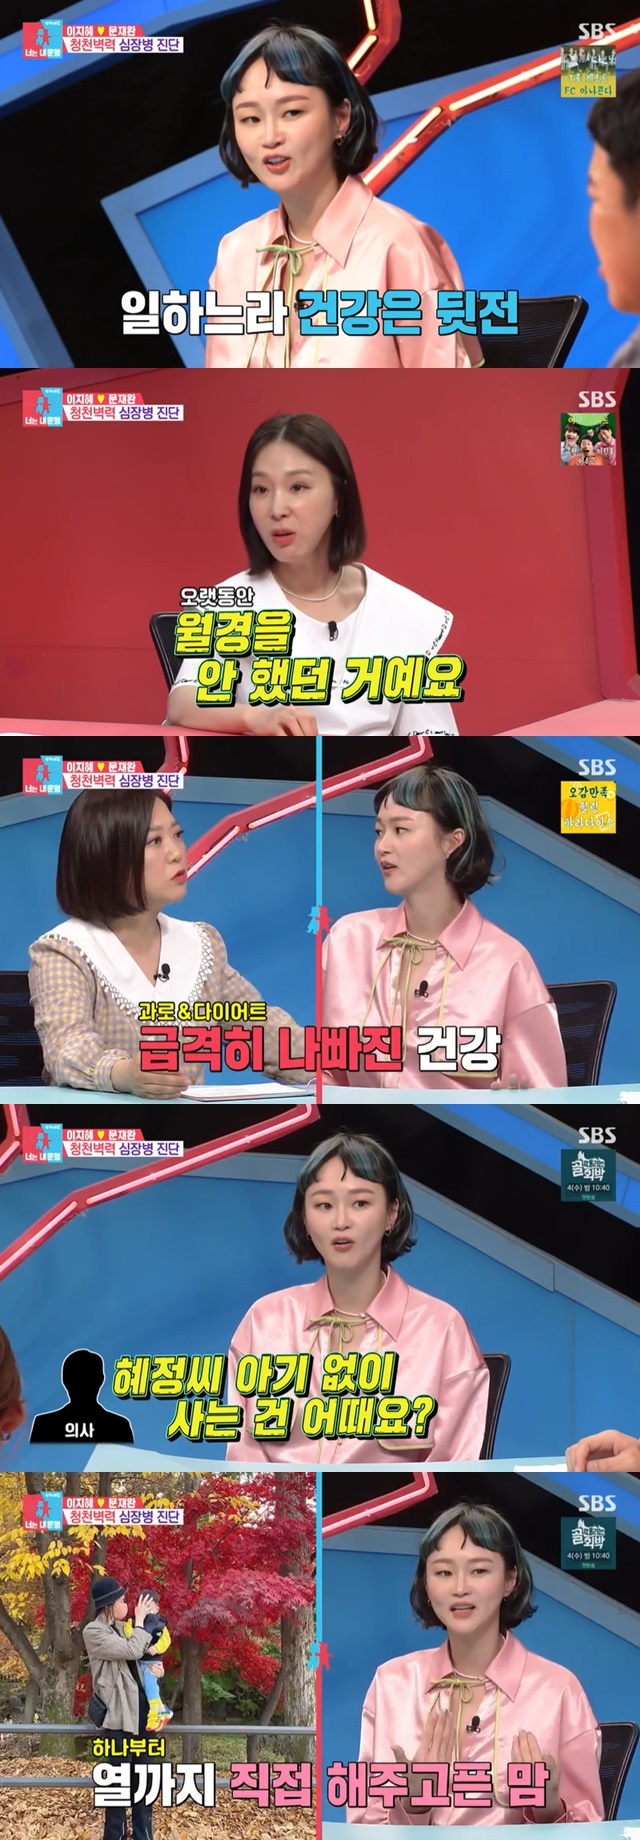 Lee Hye-jung revealed that she did not have long menstruation at the time of modelling activity.Special MC Lee Hye-jung appeared on SBS Same Bed, Different Dreams 2 Season 2 - You Are My Destiny broadcast on May 2.When Kim Sook asked, I was having a little difficulty in pregnancy and suffered from postpartum depression shortly after birth, Lee Hye-jung said, When I was working in New York as a model, I kept 47kg at my height (179cm).I didnt know my condition when I was so passionate, and I came back to Korea after my activities, and I didnt have a long period of menstruation.Lee Hye-jung said, When I went to obstetrics and gynecology, when my teacher said, Why do not you live without Hyejung Christina Aguilera? When My Love Blooms felt like a woman, my life was over.I have gained Christina Aguilera in three years, a few miscarriages, too hard. Lee Hye-jung said, I thought I should take it too hard and do it with my hands.When I was breastfeeding my child and being so beautiful, my neck was so sick that I saw the petals flying around the window, when my Love Blooms tears poured out.I didnt think Id have postpartum depression, so I did.